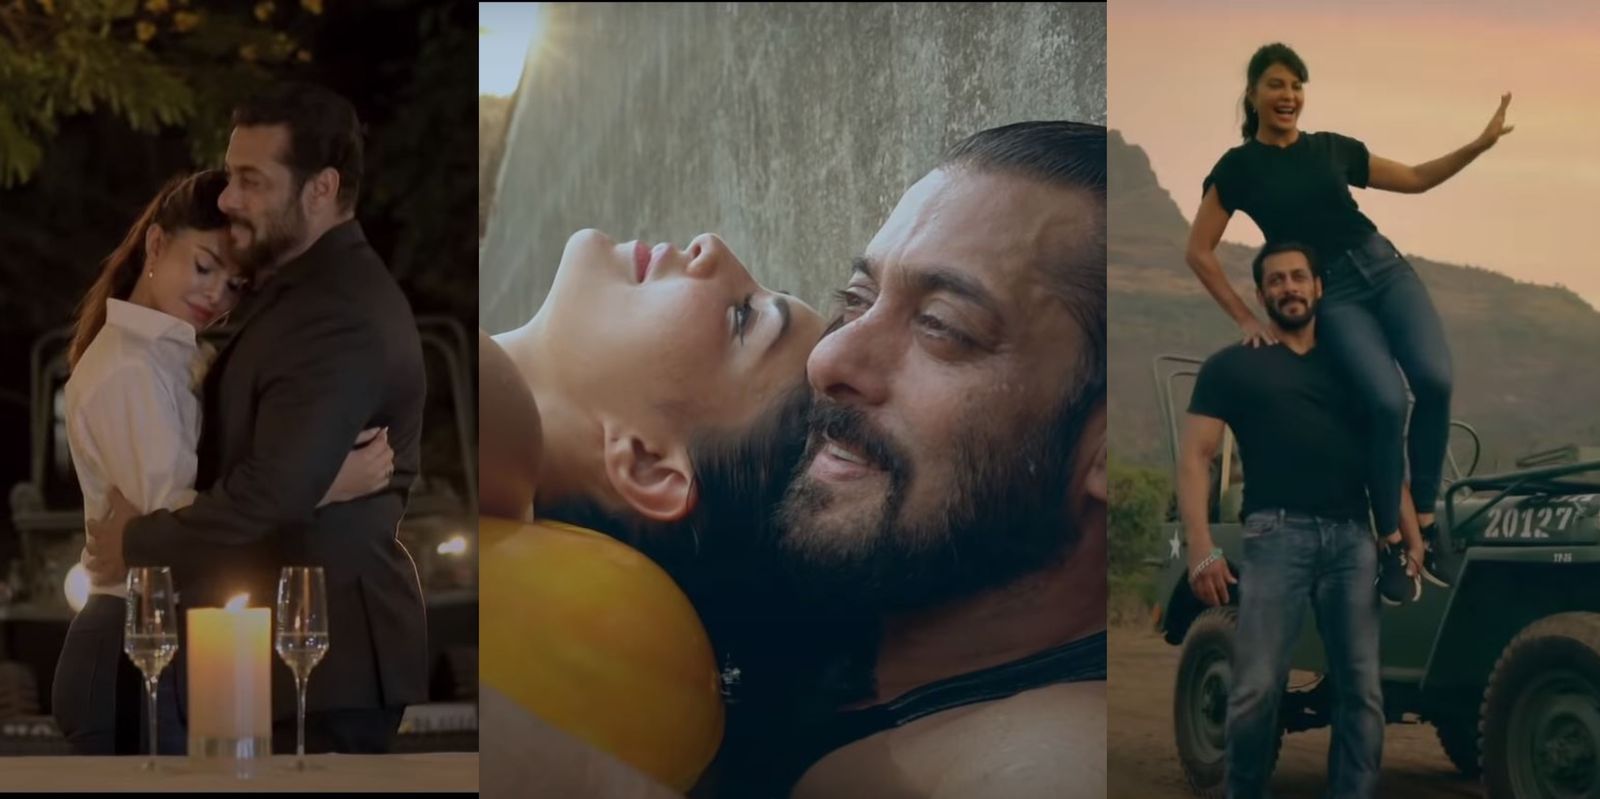 Tere Bina Teaser: Salman Khan Woos Jacqueline Fernandez In His ‘Cheapest Production’ With His Lavish Farmhouse In The Backdrop